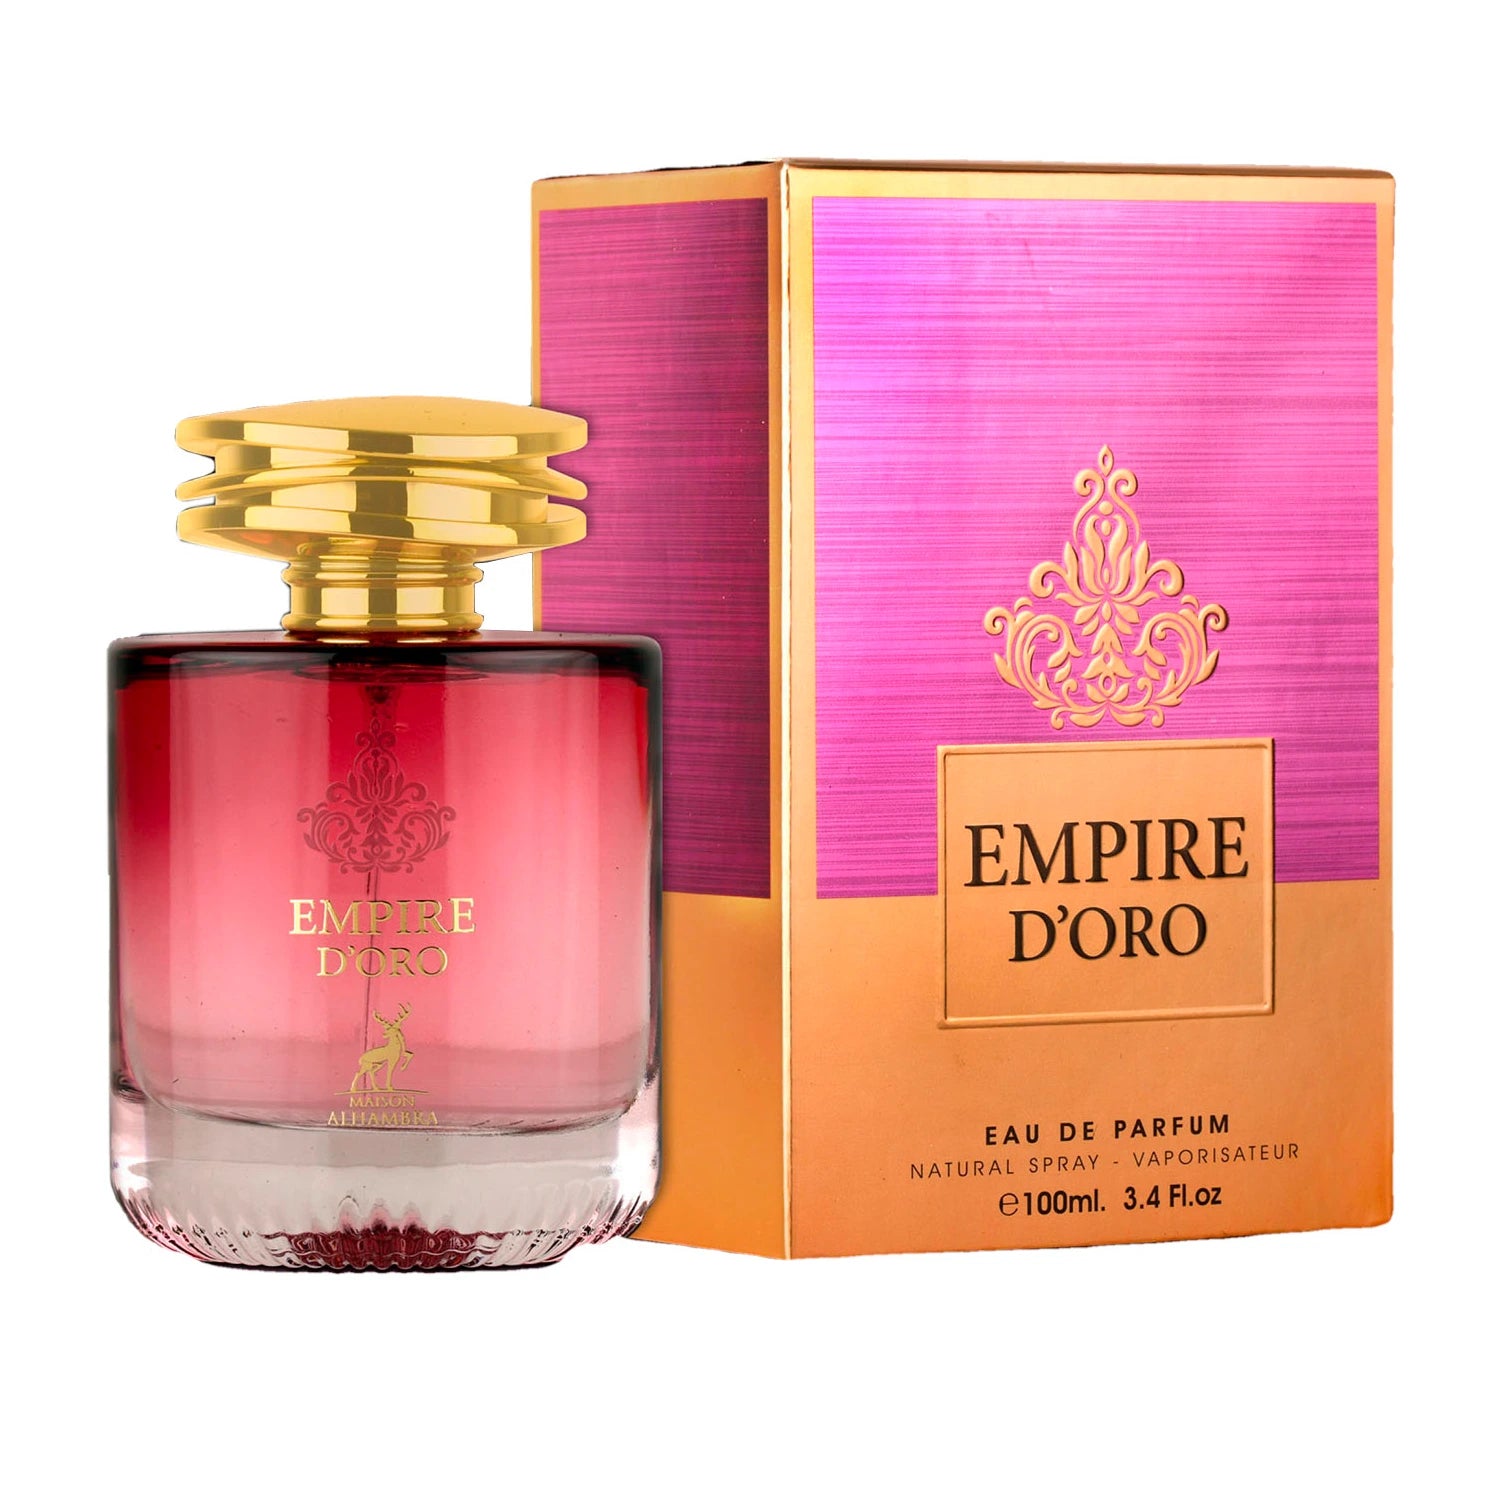 <p><em>INSPIRED BY </em><strong>PACO RABANNE LADY MILLION EMPIRE</strong></p>
<p>Empire D'oro Perfume by Maison Alhambra is a luxurious scent for women, inspired by the classic Paco Rabanne Lady Million Empire. Enjoy an unmistakably similar fragrance without the expensive price tag. A perfect alternative for those seeking an iconic aroma.</p>
<p><strong><br></strong></p>